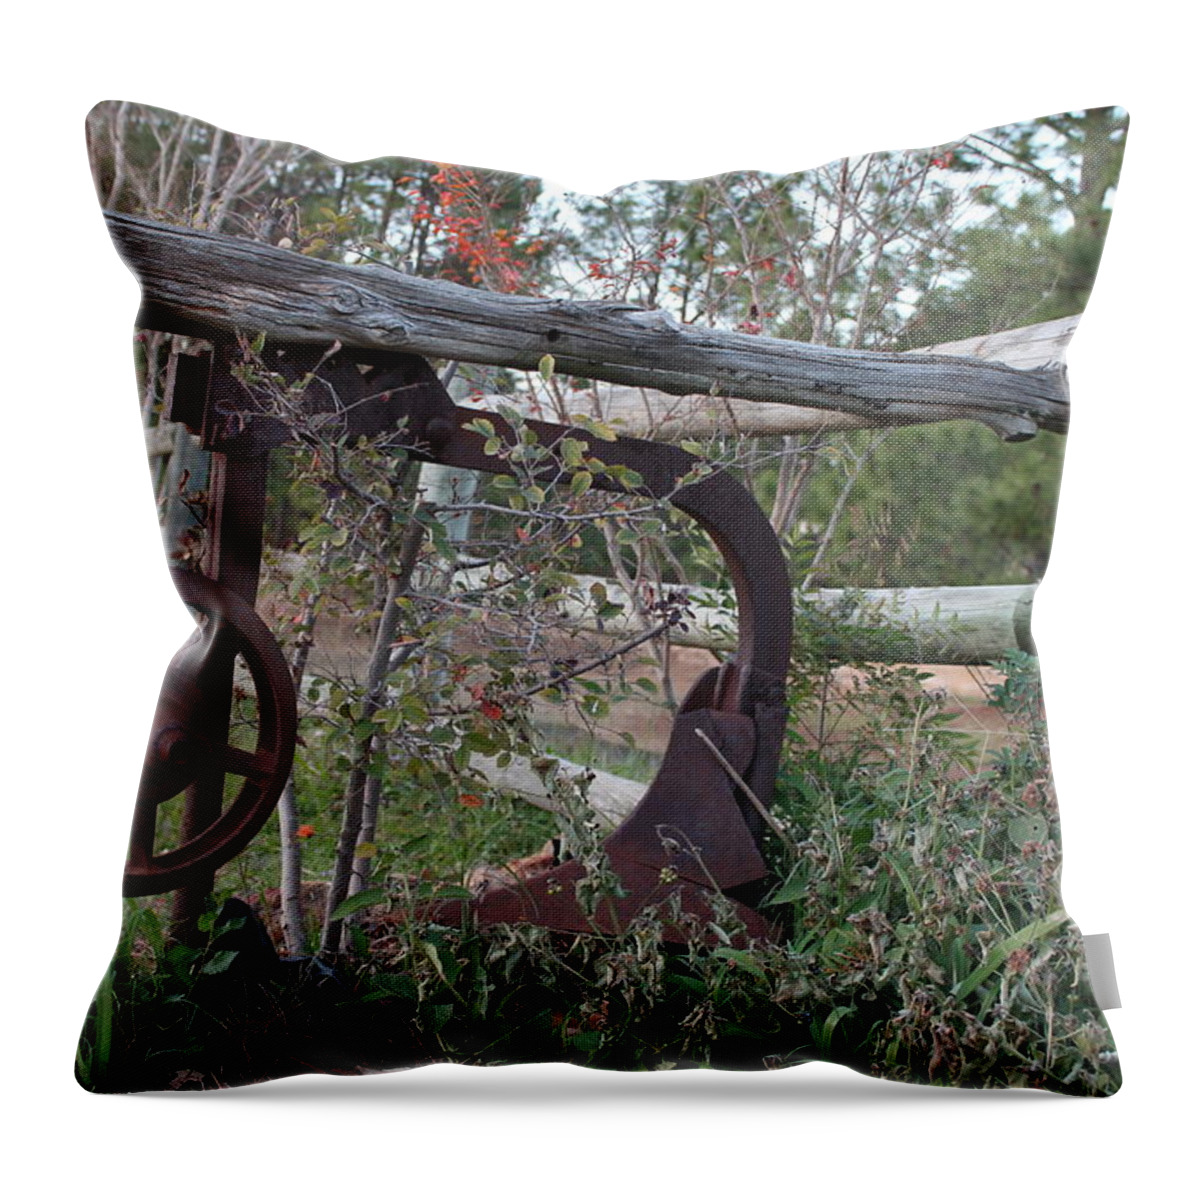 Rural Throw Pillow featuring the photograph Rural Fence Post by Lorri Crossno